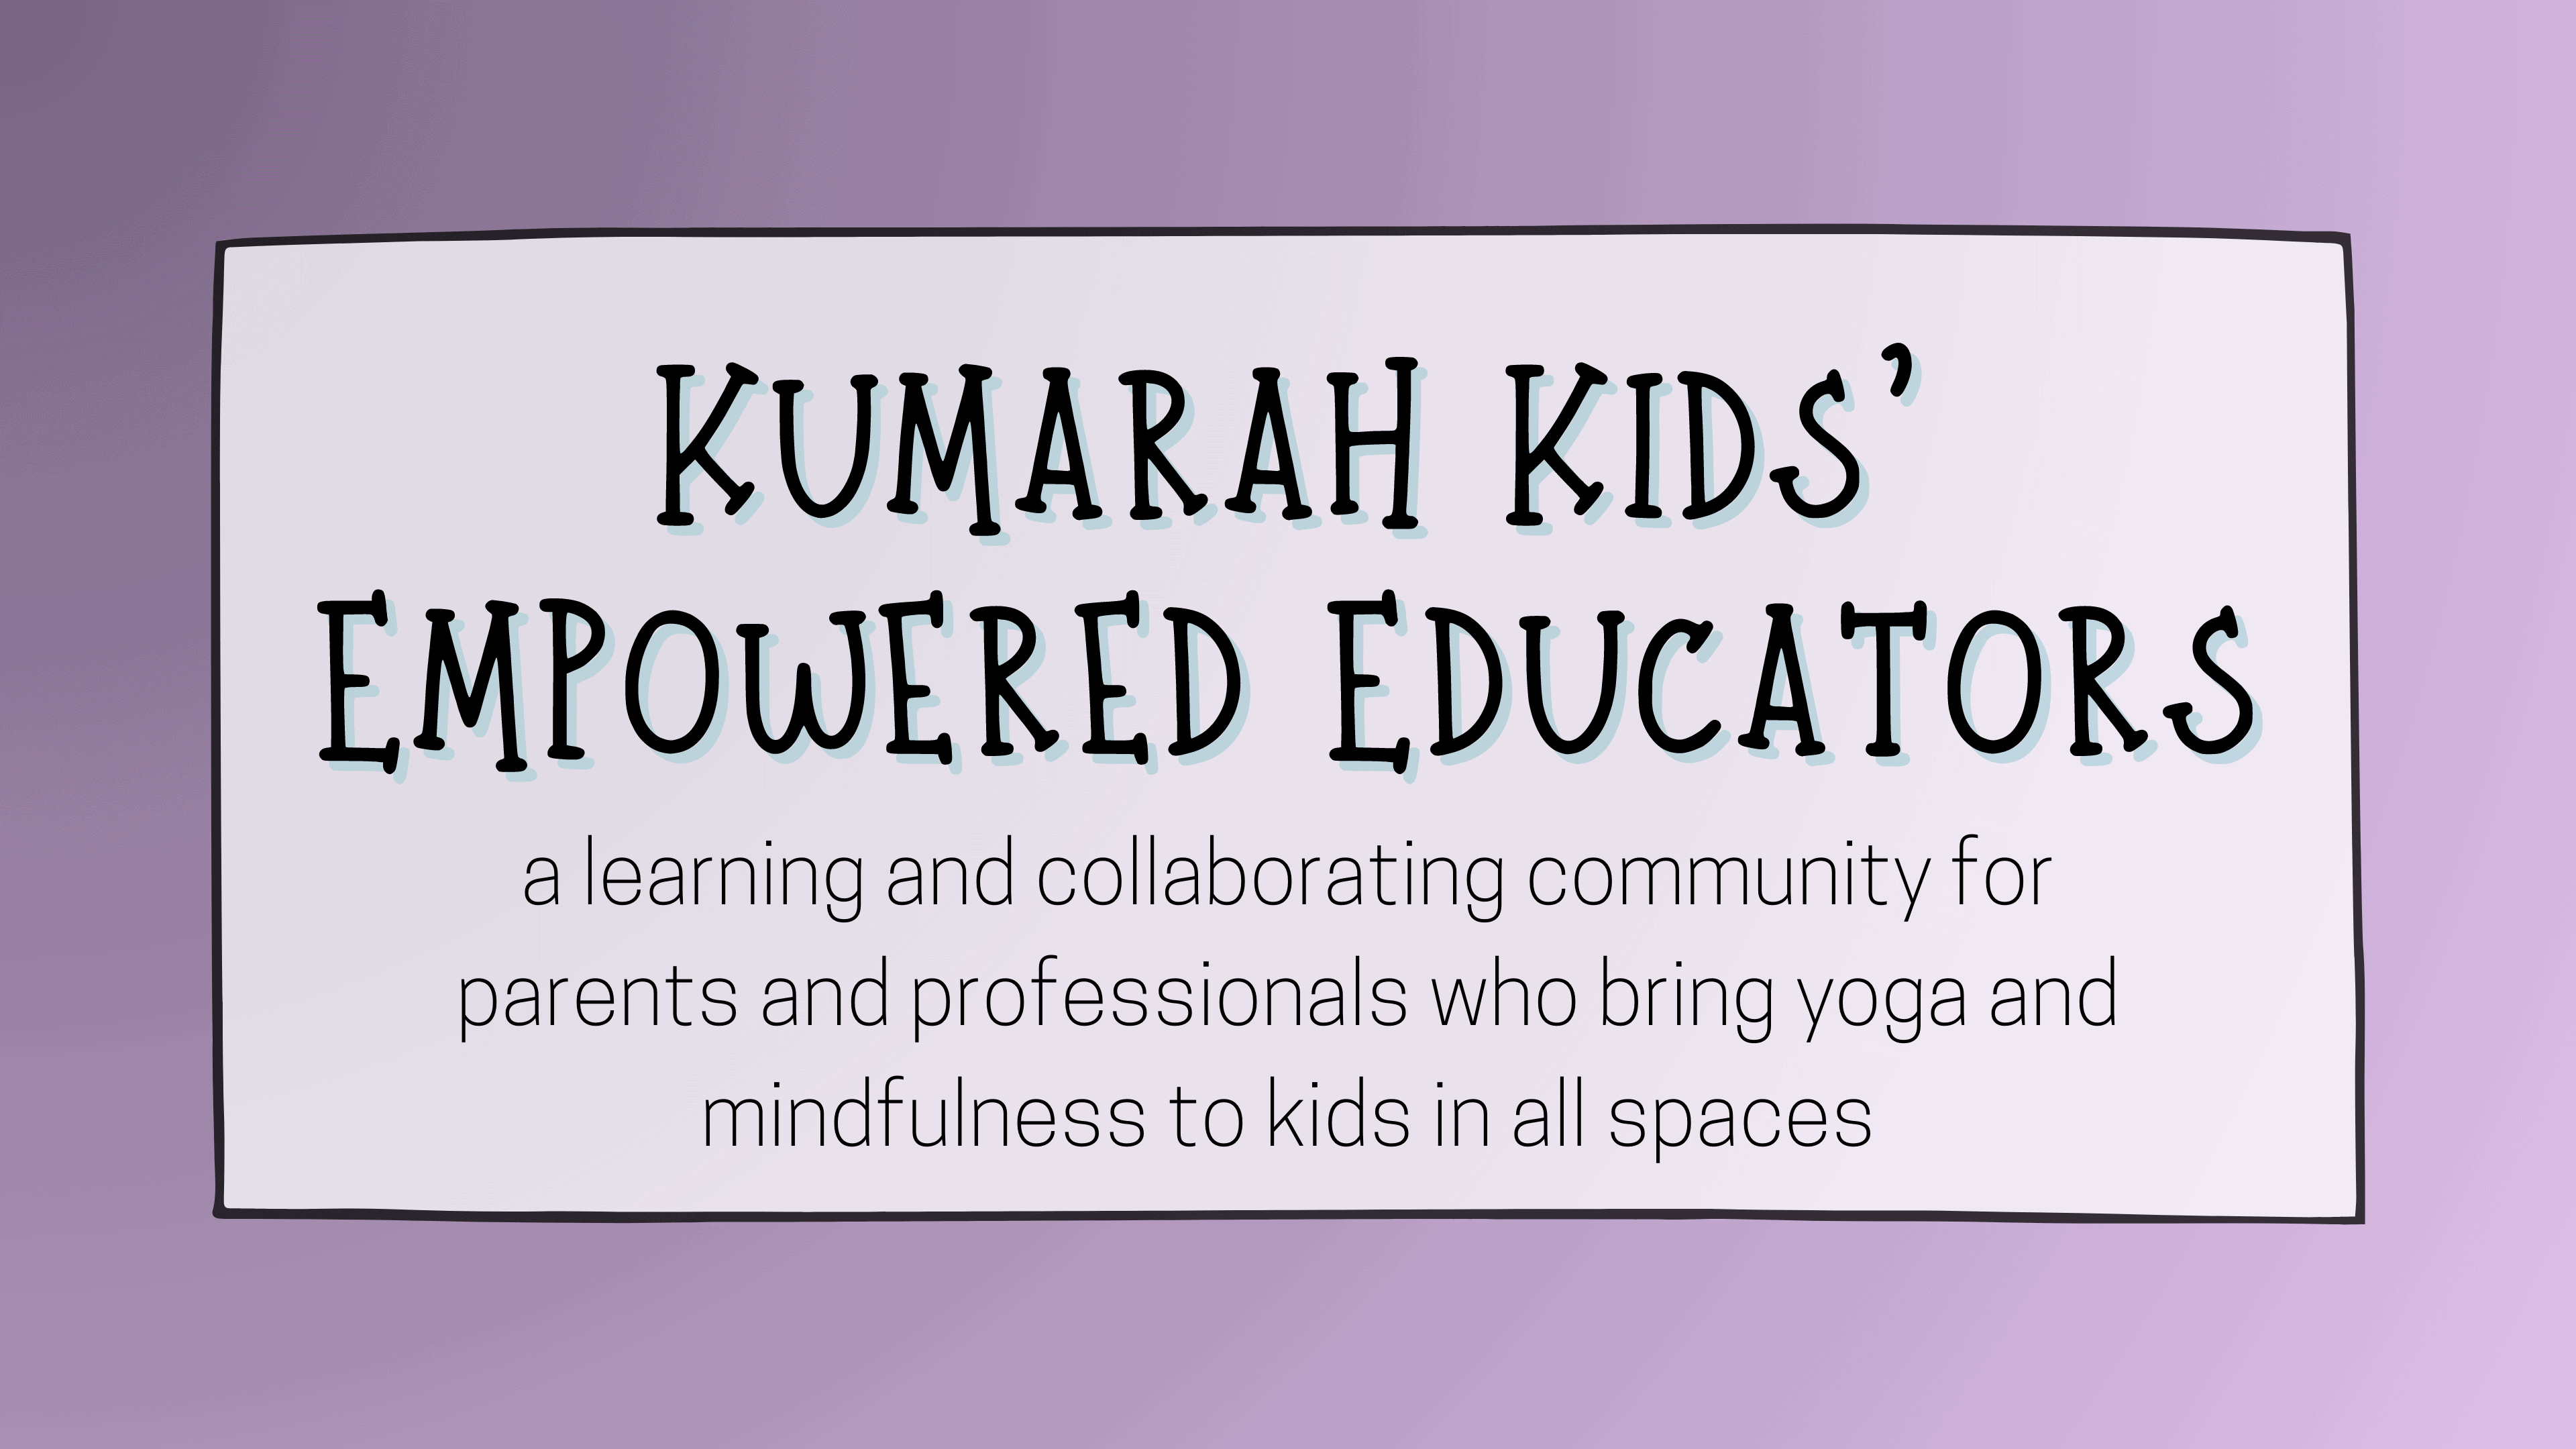 kumarah kids' empowered educators, a learning and collaborating community for parents and professionals who bring yoga and mindfulness to kids in all spaces